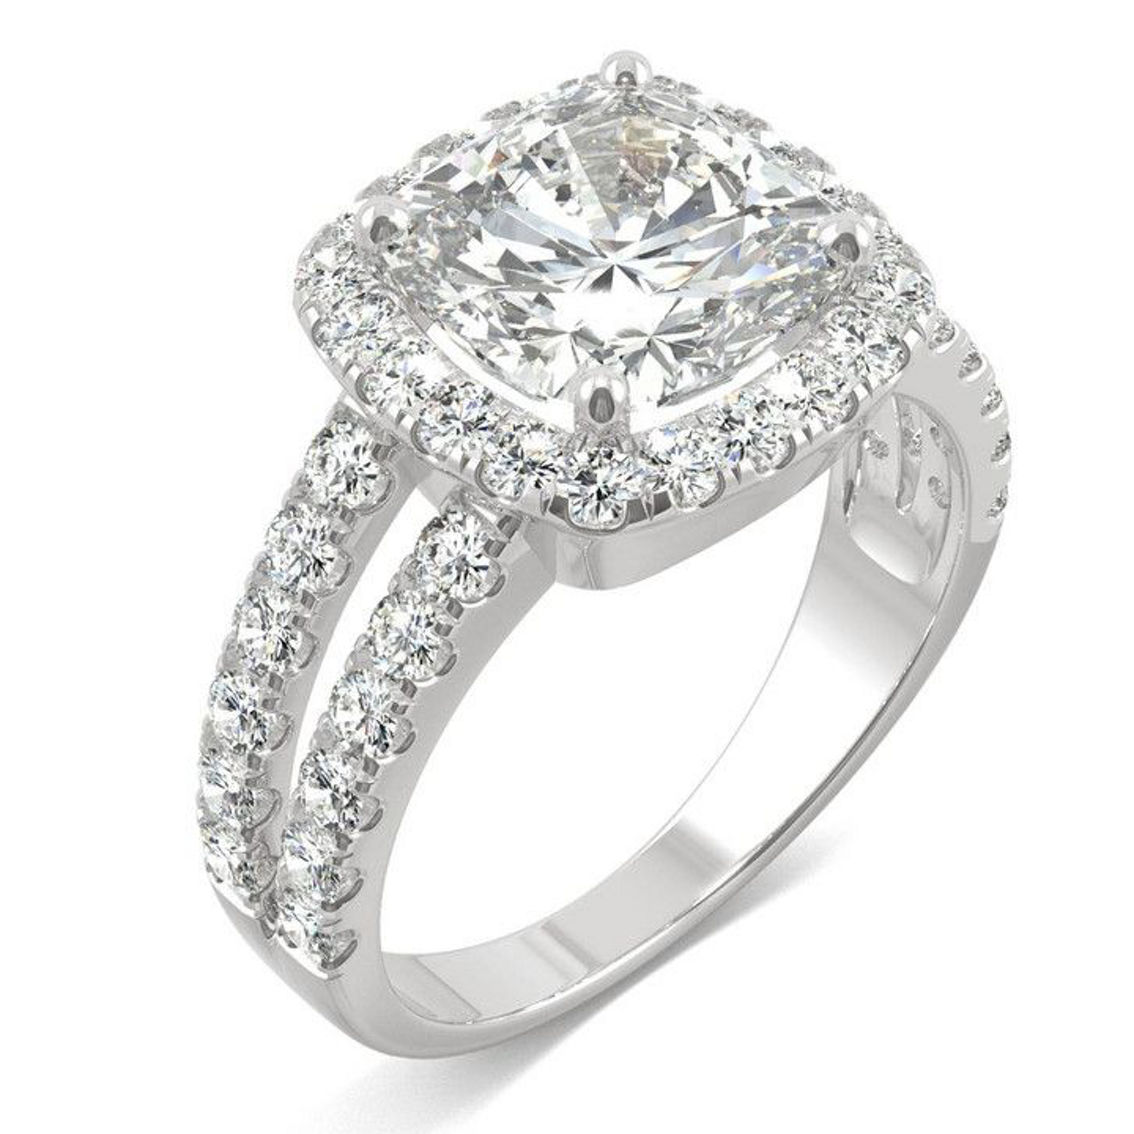 Charles & Colvard 4.24cttw Moissanite Cushion Halo Engagement Ring in 14k Gold - Image 2 of 5